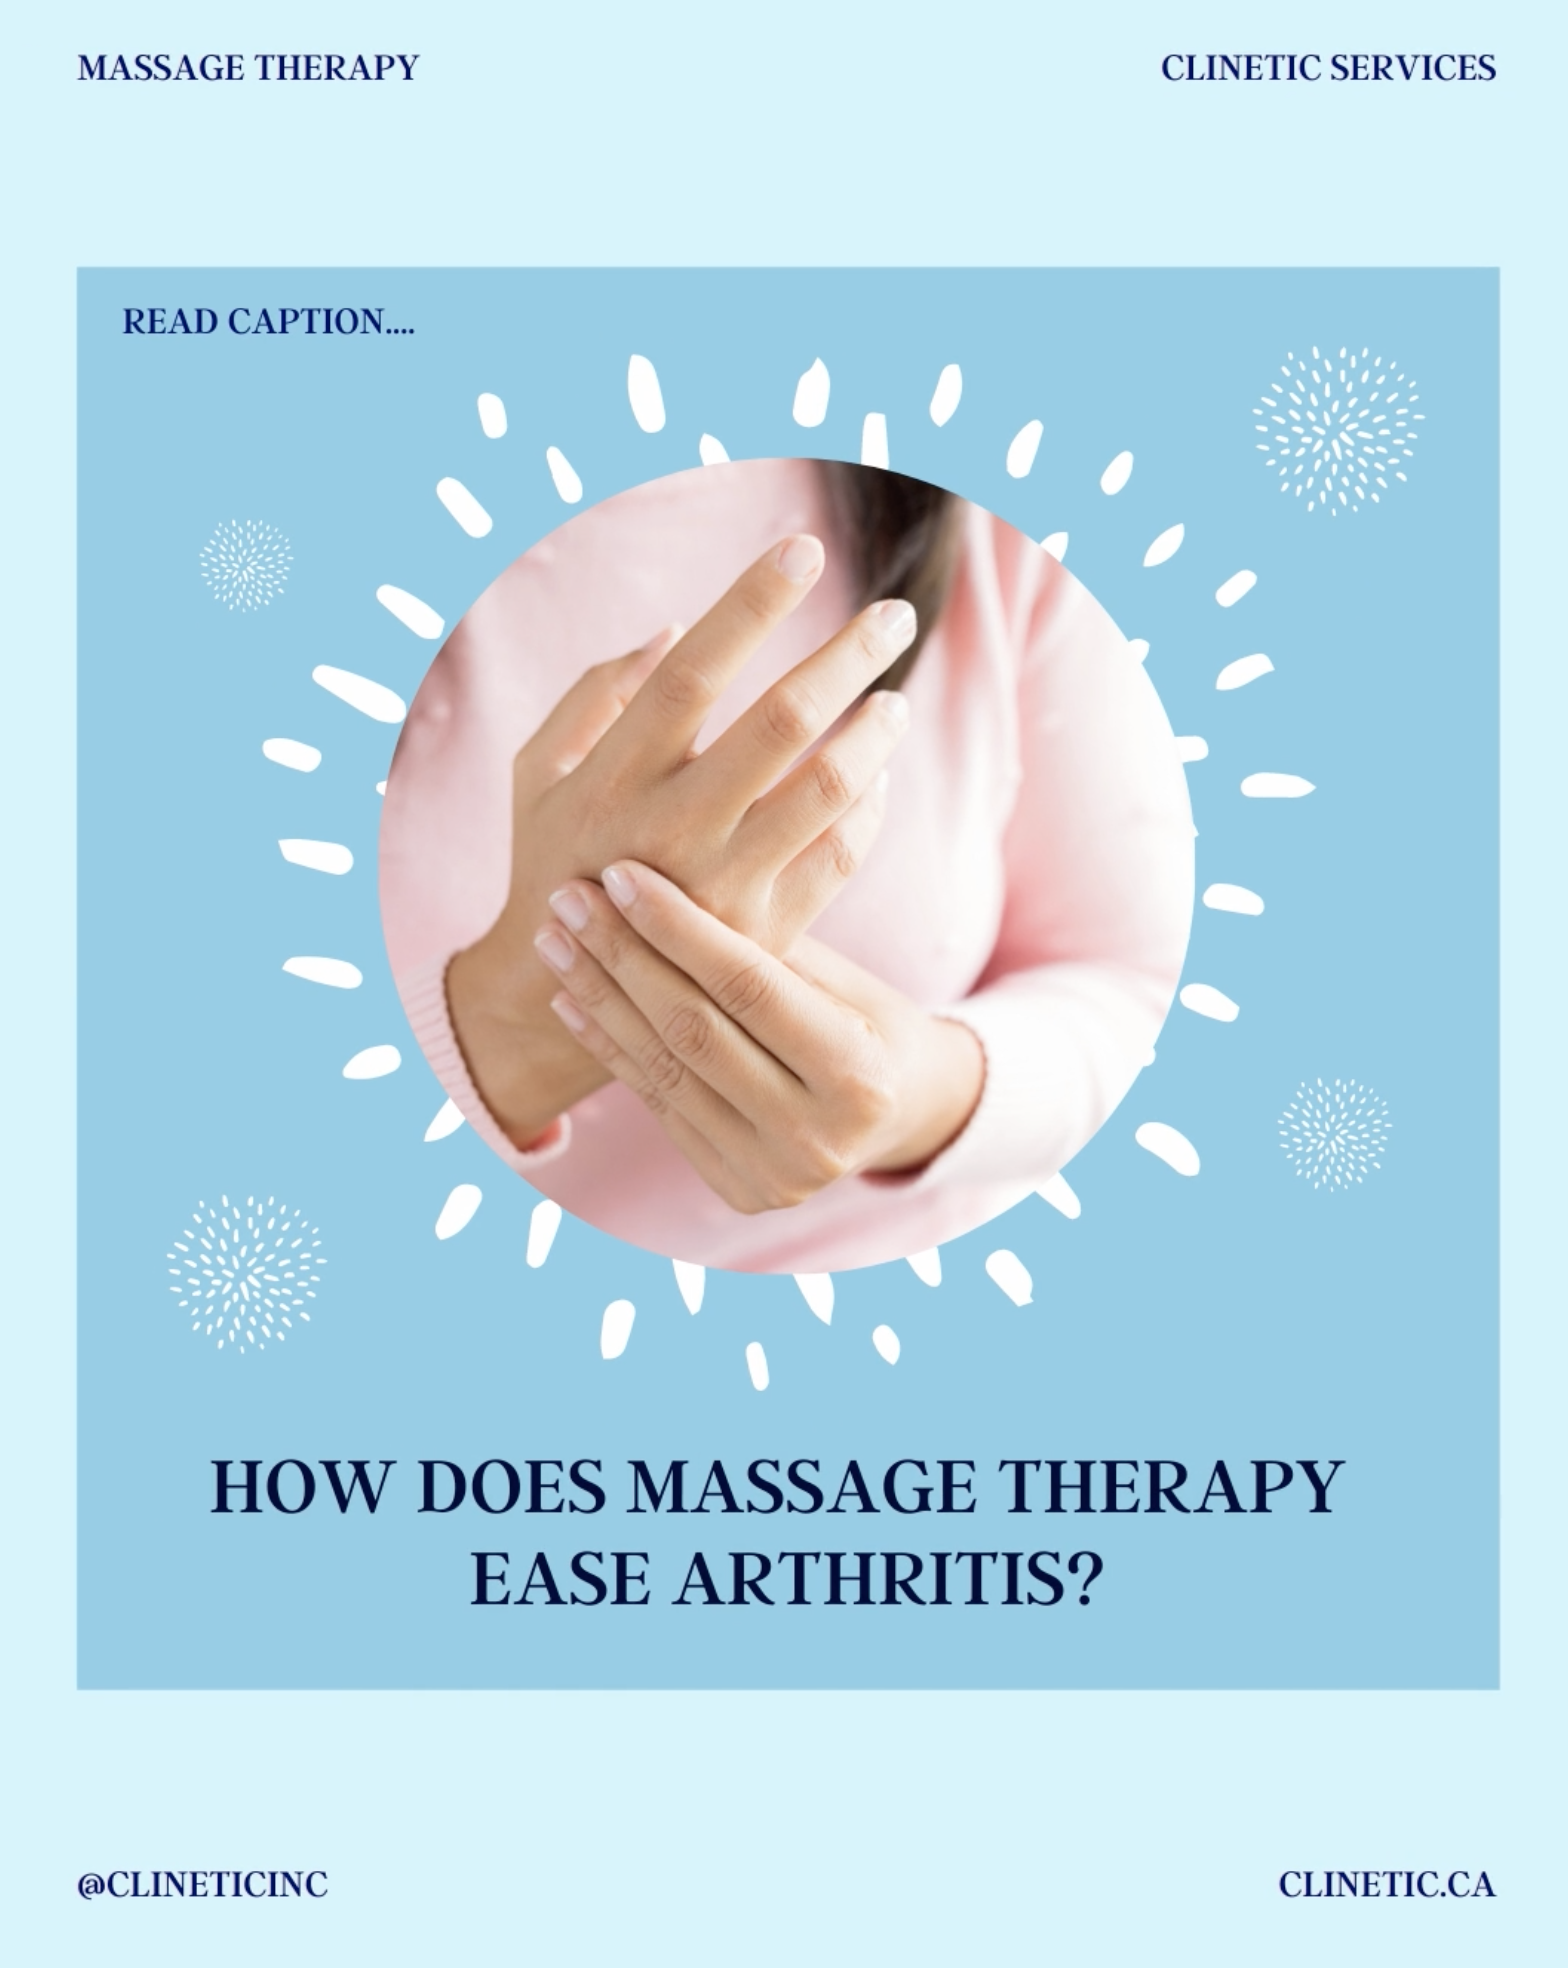 How does massage therapy ease arthritis?